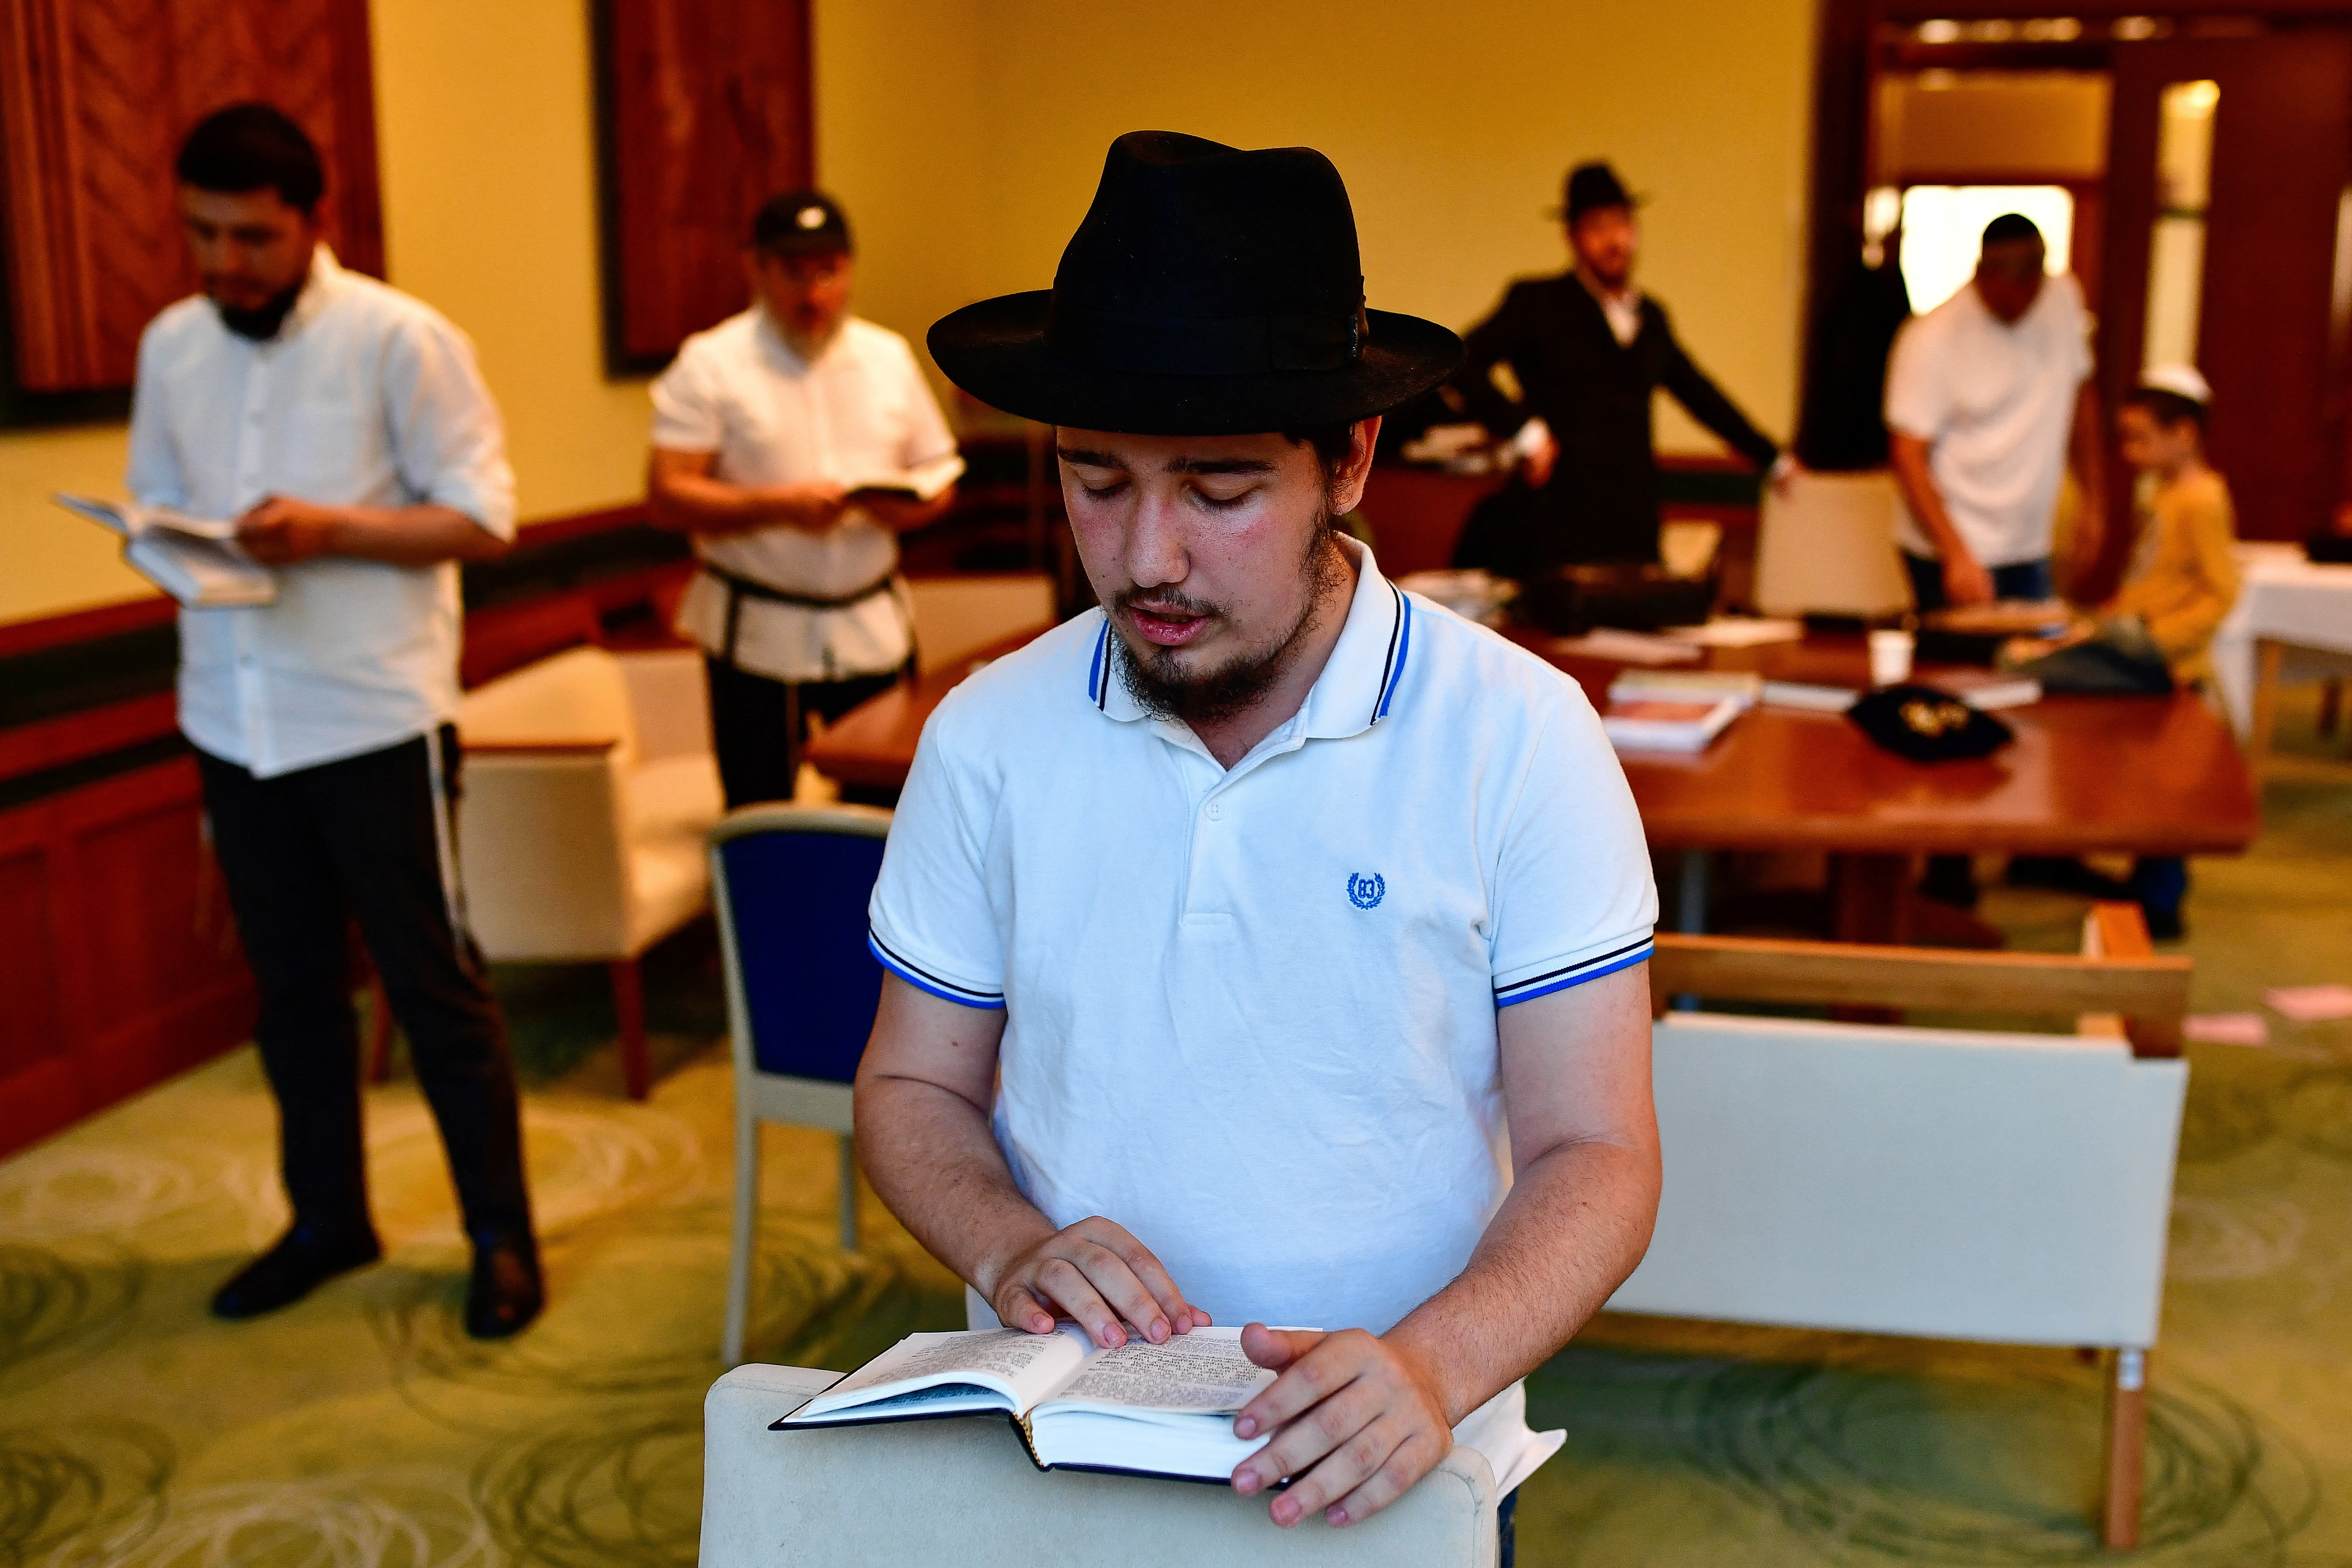 Hasidic Jewish refugees from Ukraine find peace and calm in a kosher rescue village